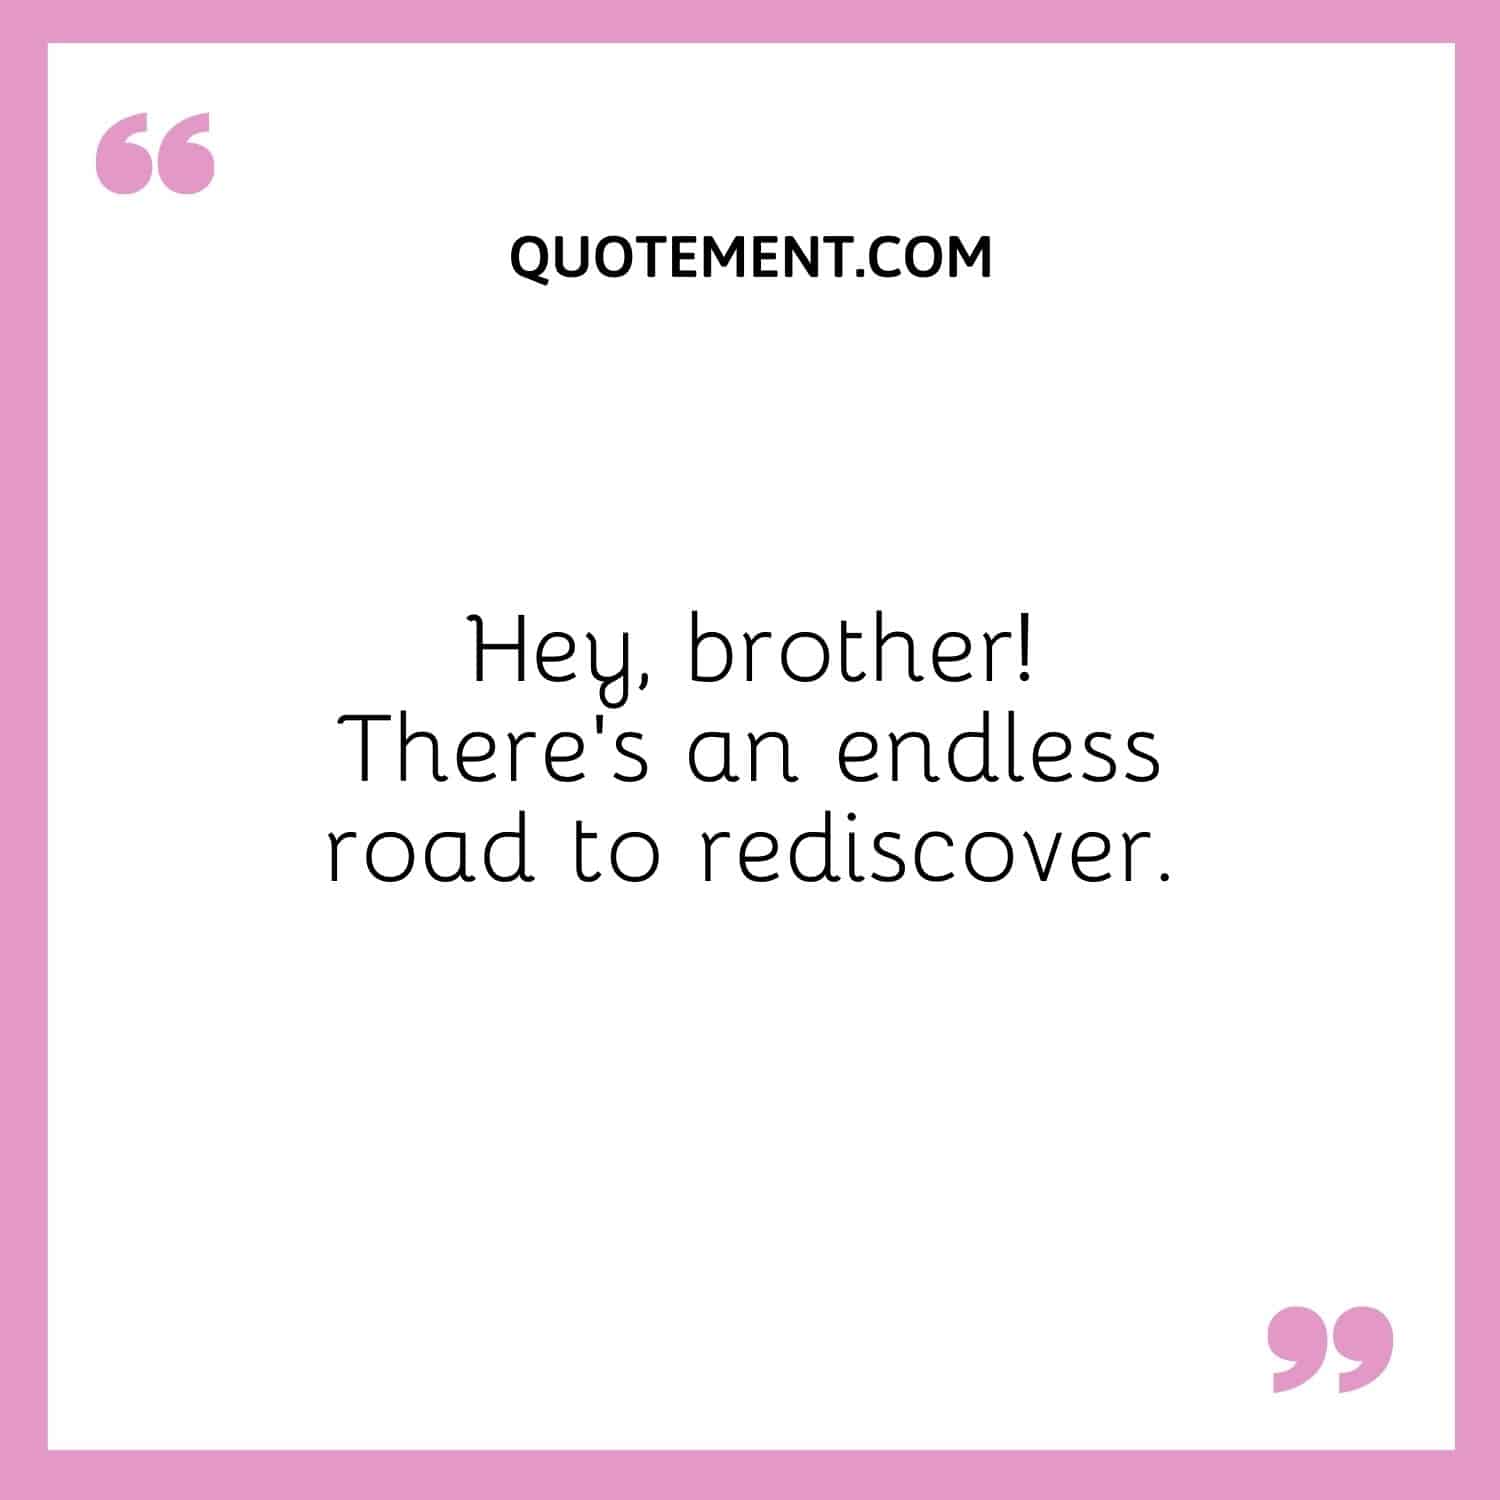 Hey, brother! There's an endless road to rediscover